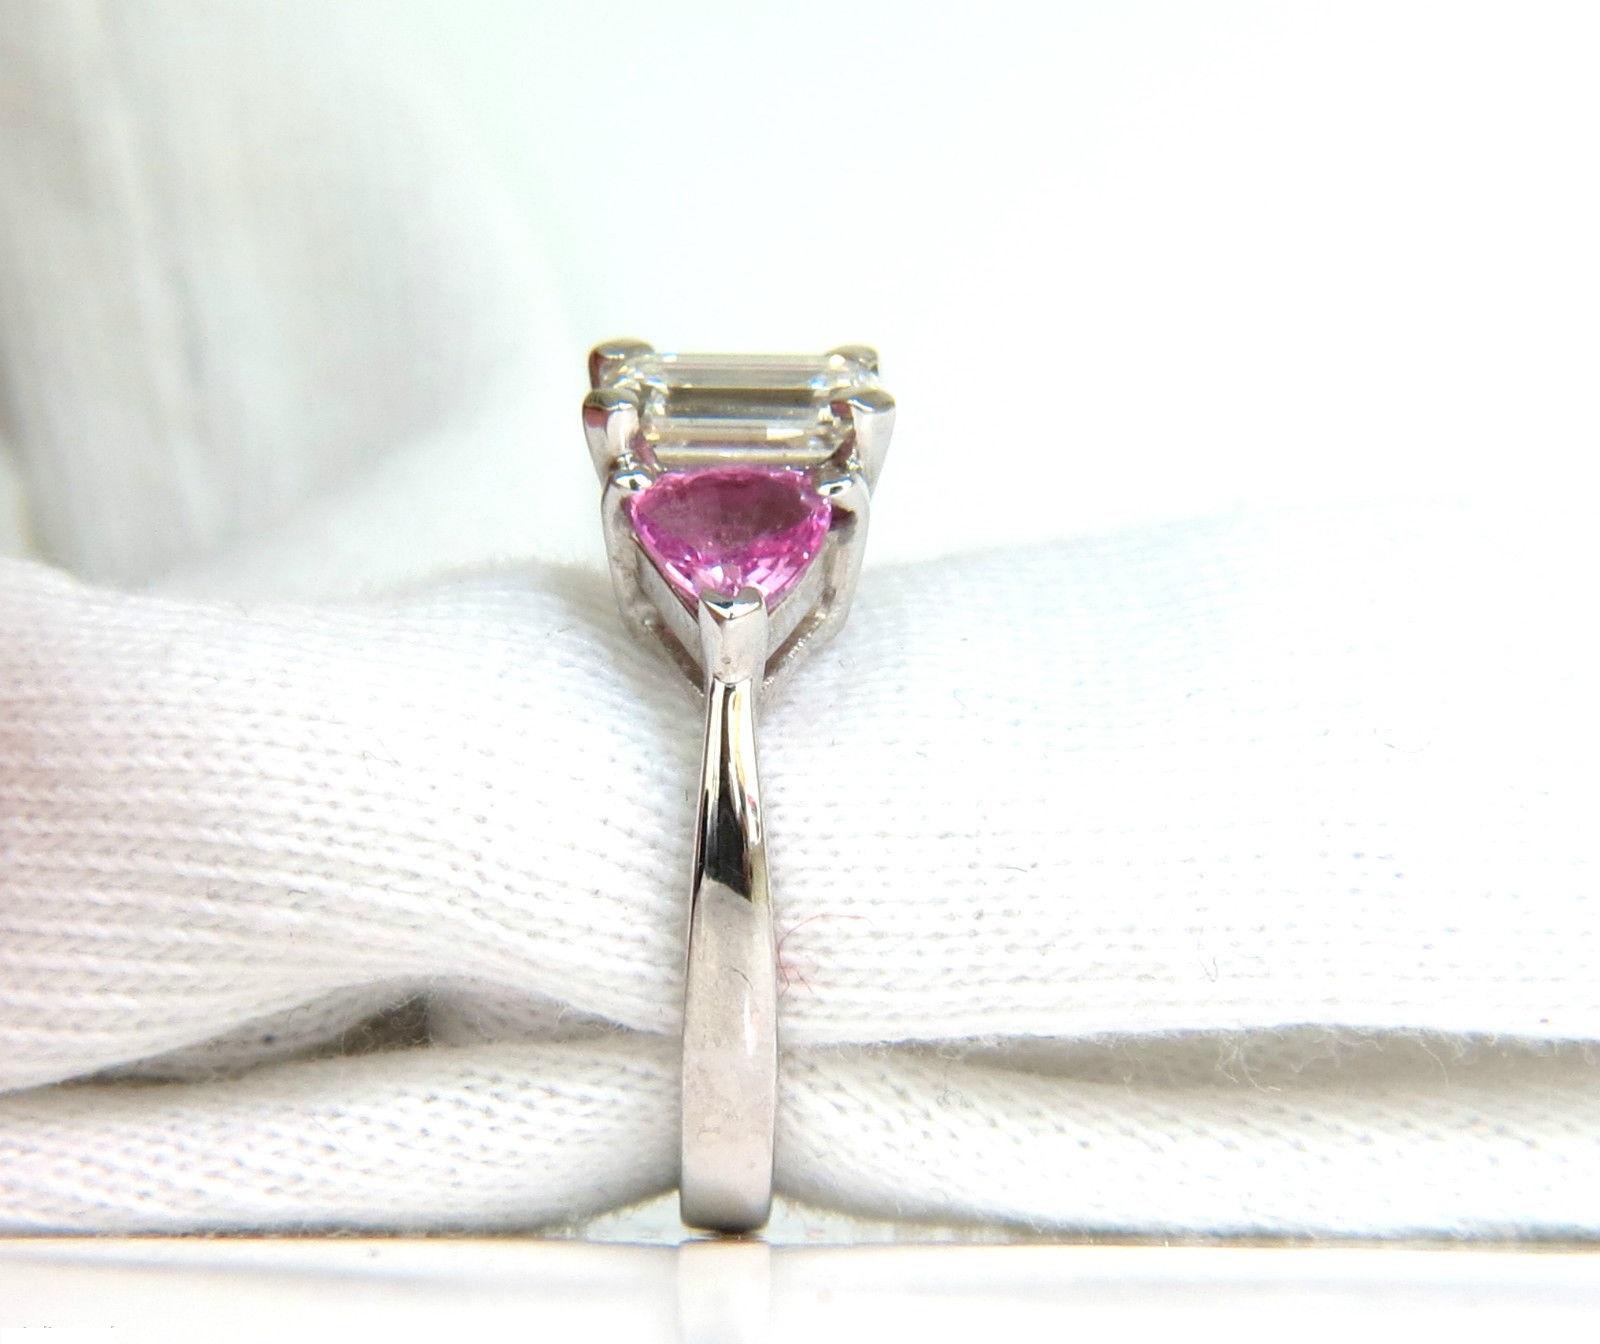 1.53ct. Emerald Cut diamond

Full Cut Brilliant

J-color Vs-1 Clarity

7.83 X 5.4mm



Side Trilliant Natural Pink Sapphires: 1.65ct. 

Vibrant Pink

Full cut and Full Faceted.

Gorgeous three stone ring

5.4 grams 

current ring size: 

6 

& 

We